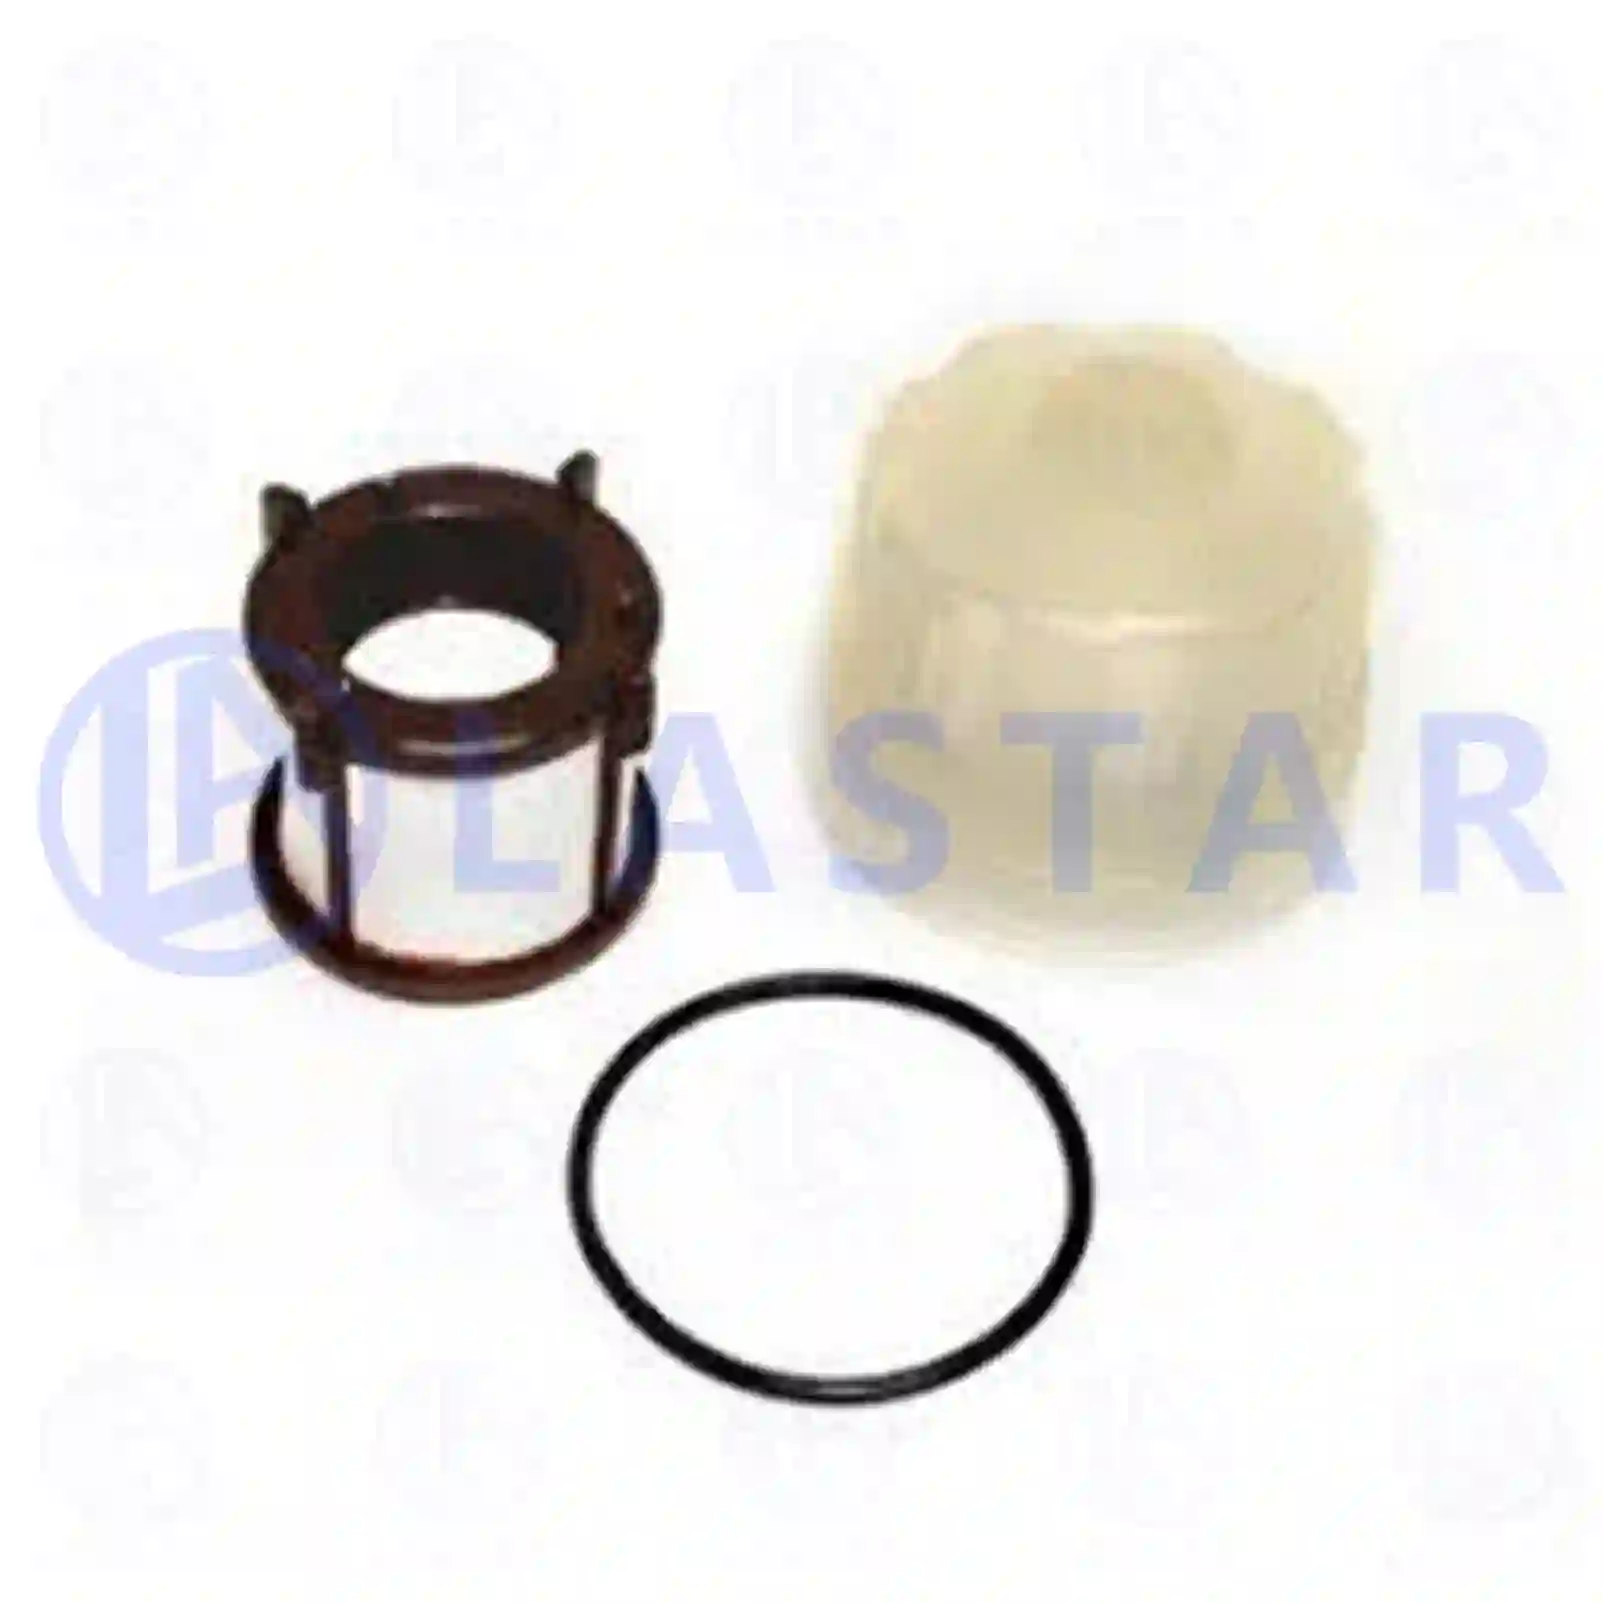 Feed Pump Filter repair kit, without filter housing, la no: 77723267 ,  oem no:1438836, 1527478, 1529699, 1534424, 1683353, 571571308, 51125030043, 0000900751, 0000901351, 0000902051, 5001852912, 7424993611, ZG10413-0008 Lastar Spare Part | Truck Spare Parts, Auotomotive Spare Parts